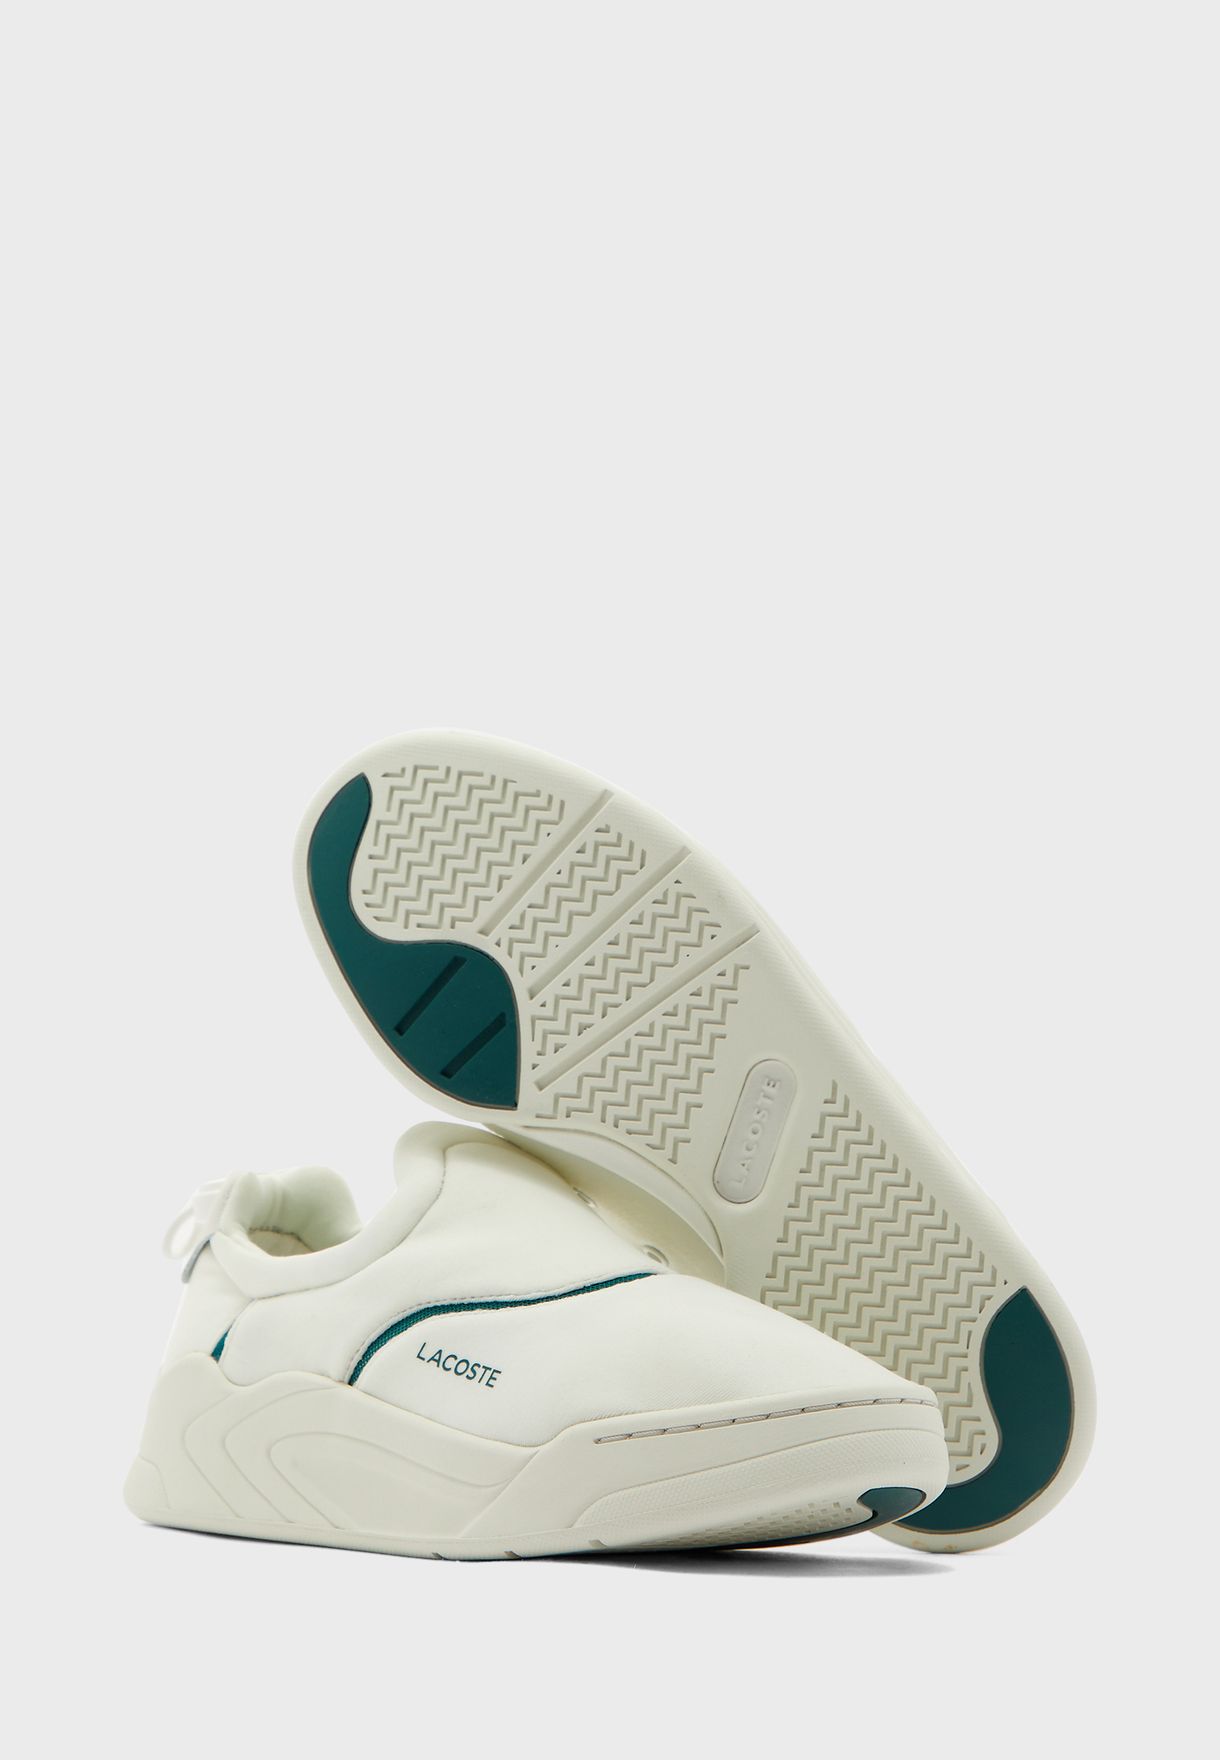 lacoste shoes slip on